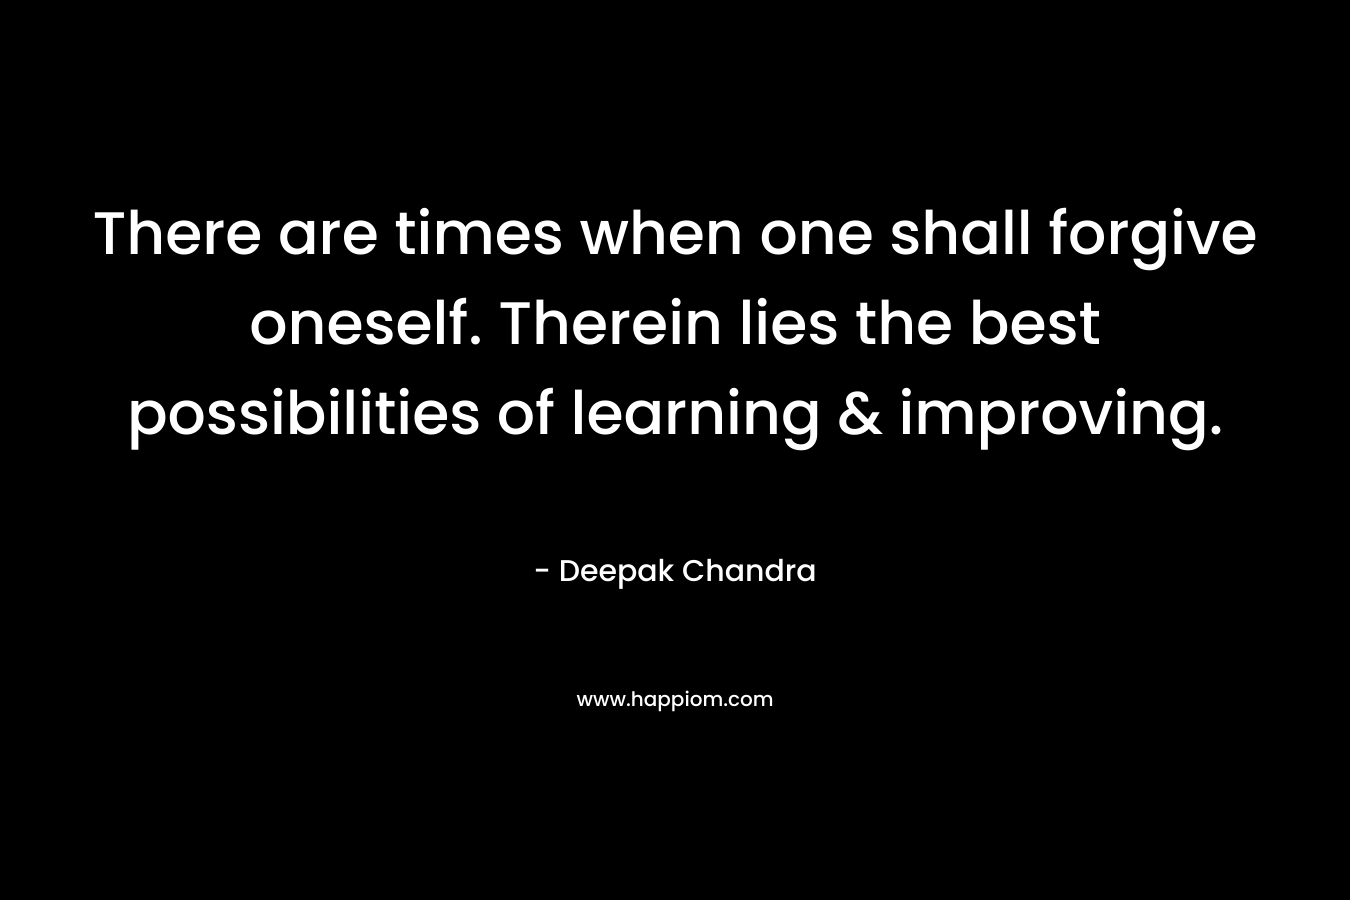 There are times when one shall forgive oneself. Therein lies the best possibilities of learning & improving.